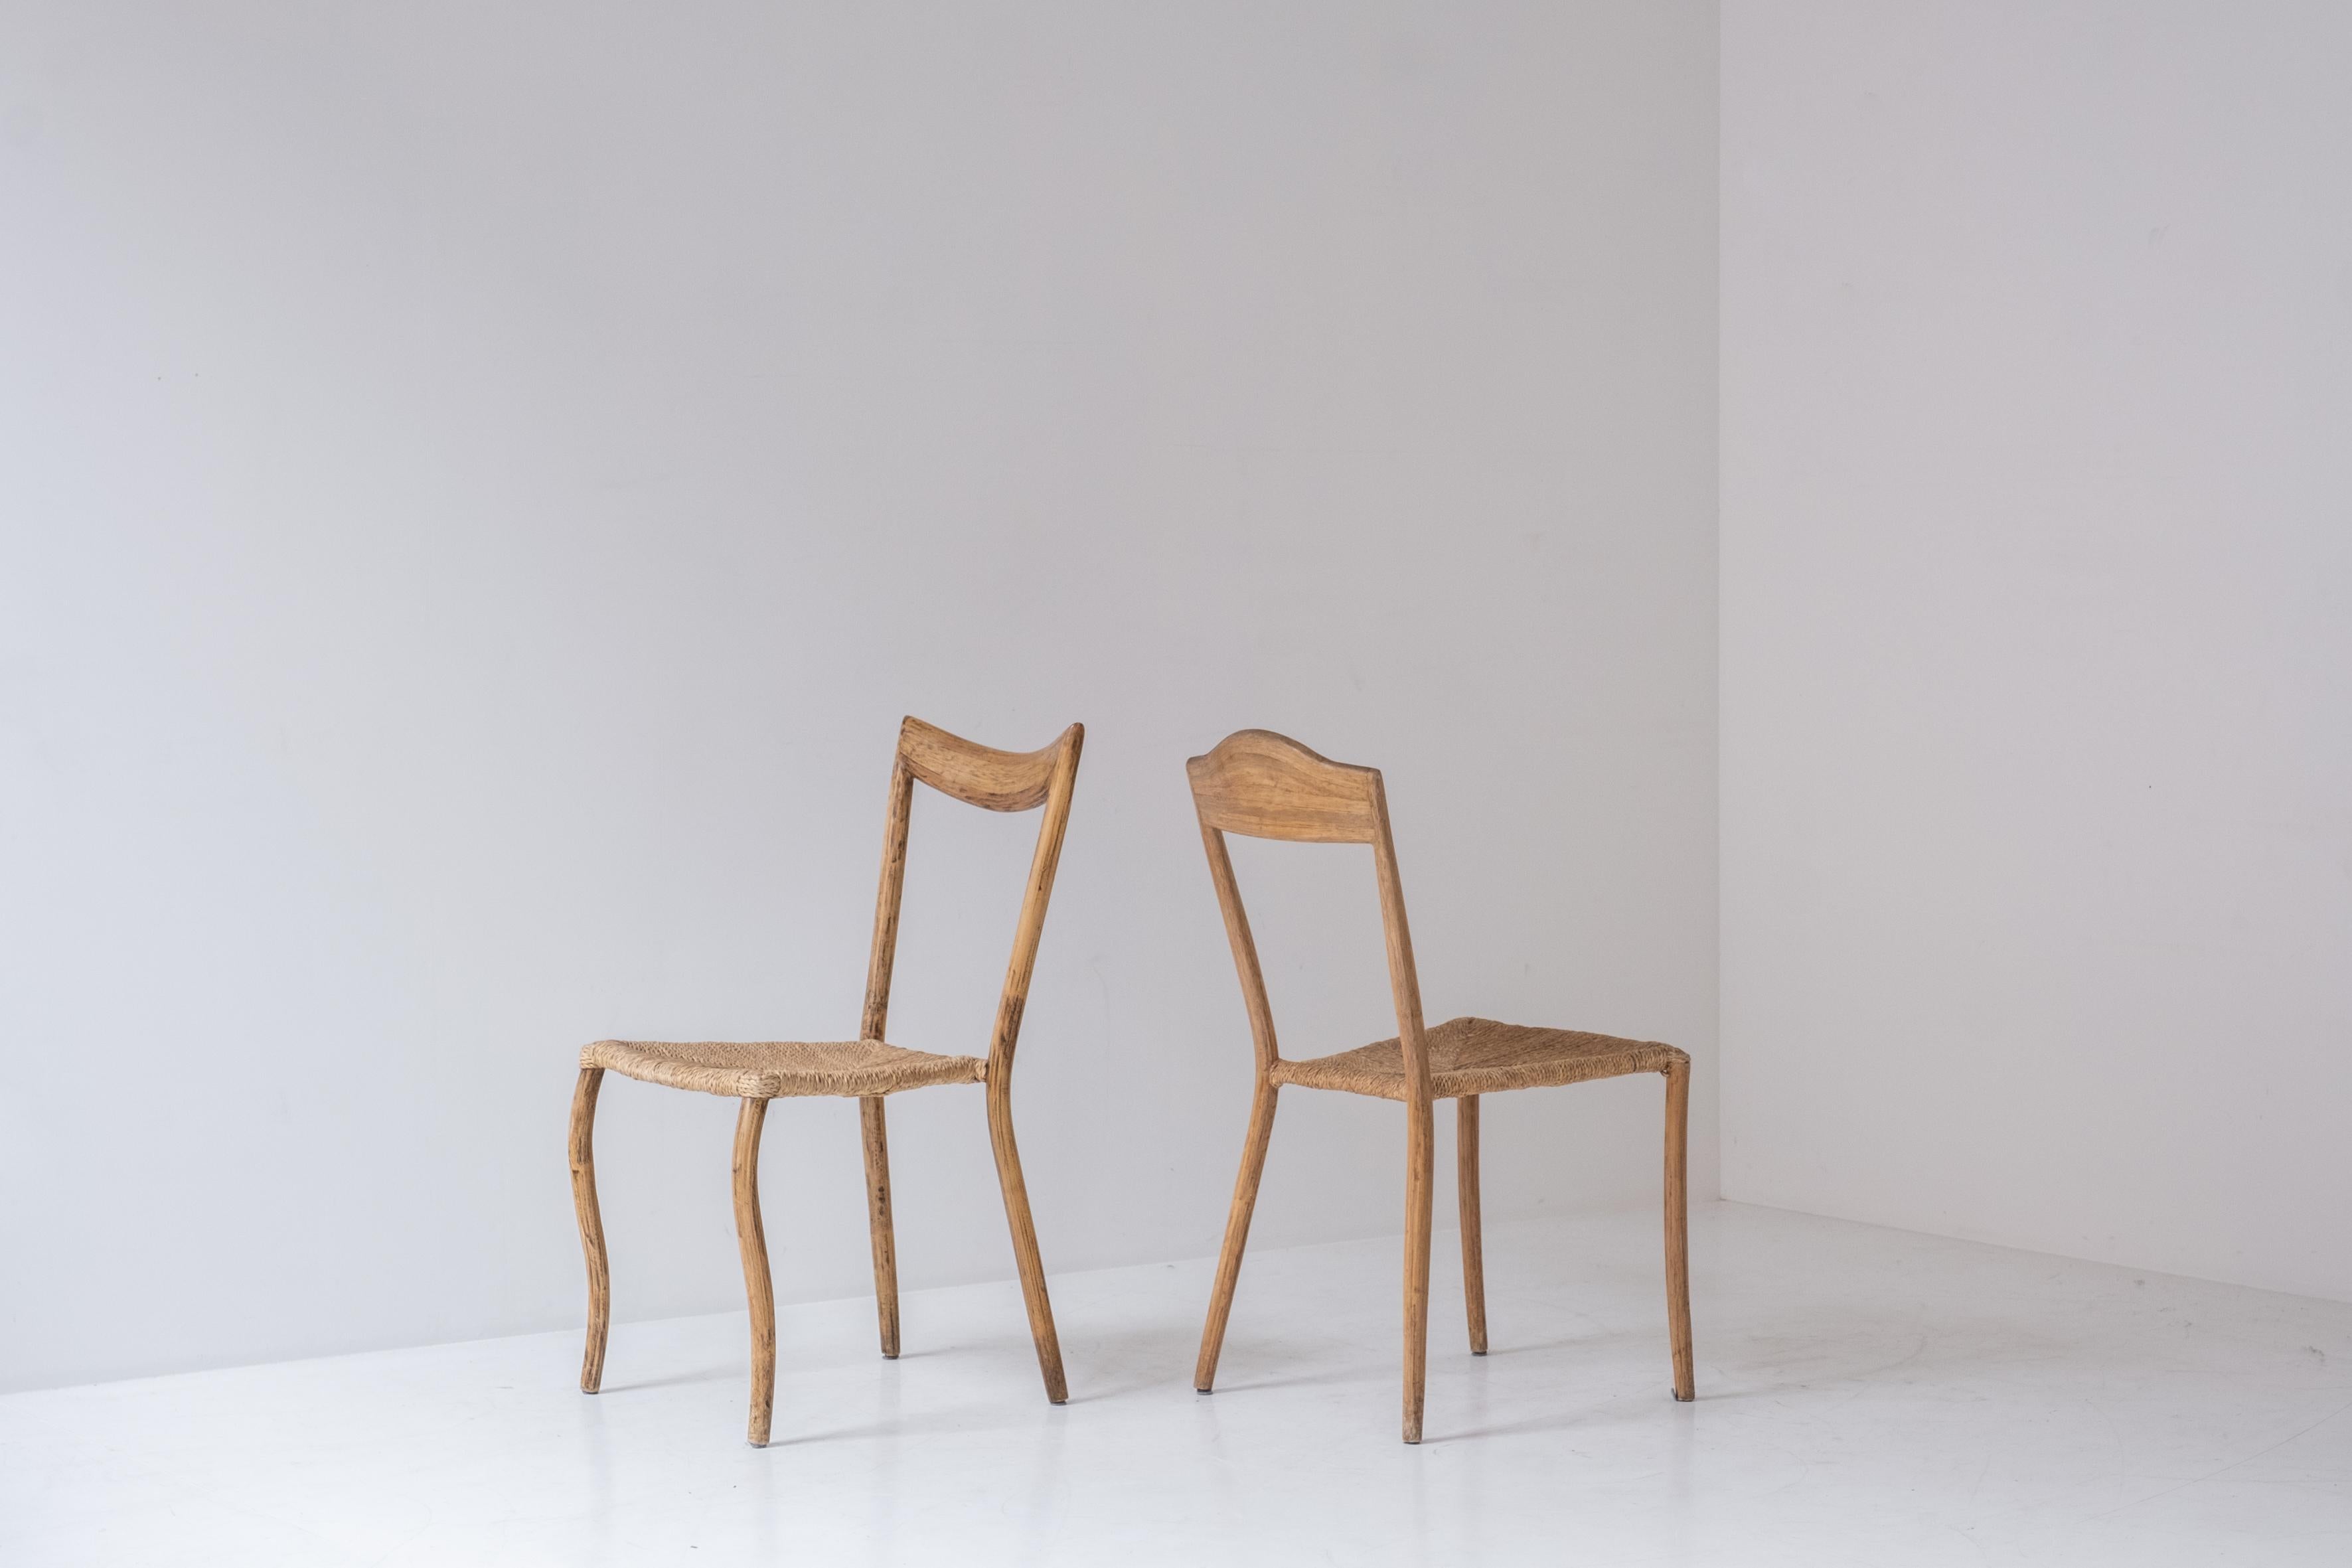 French Set of 5 Sculptural Dining Chairs from France, Designed in the 1960s